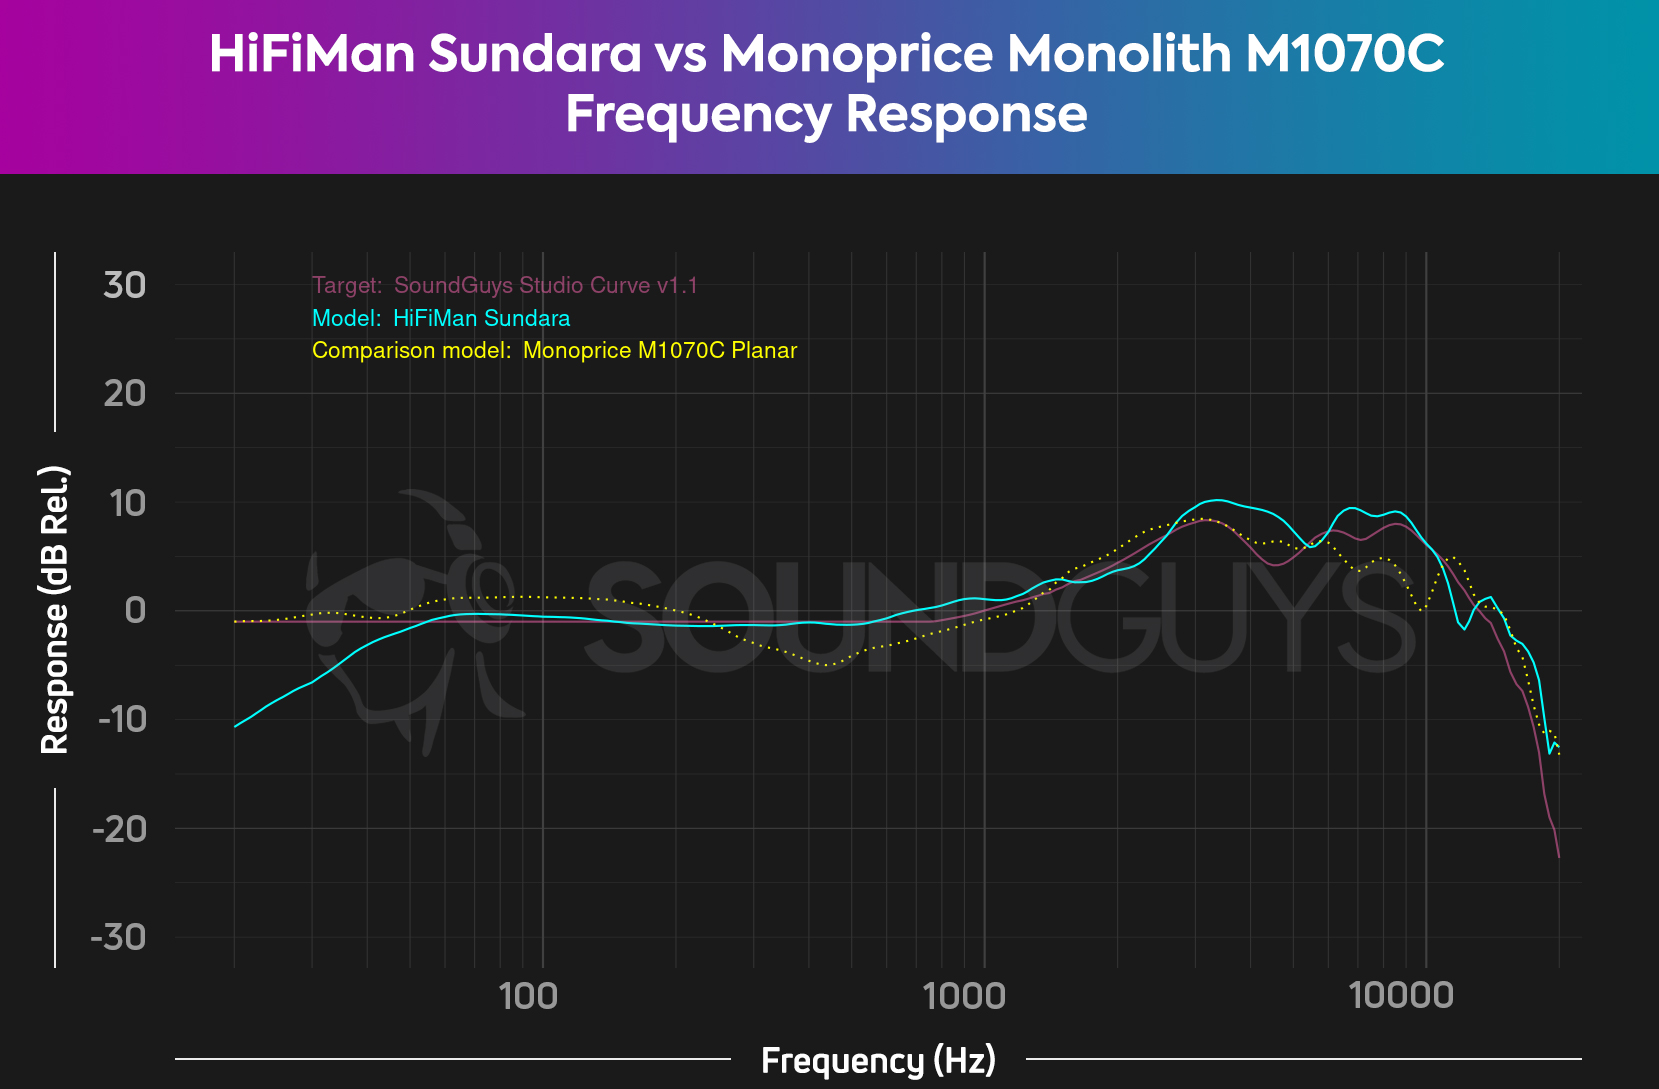 A chart compares the HiFiMan Sundara frequency response to the Monolith M1570C by Monoprice overlaid atop our studio curve, and the Monoprice headphones have a bit more sub-bass than the Sundara.